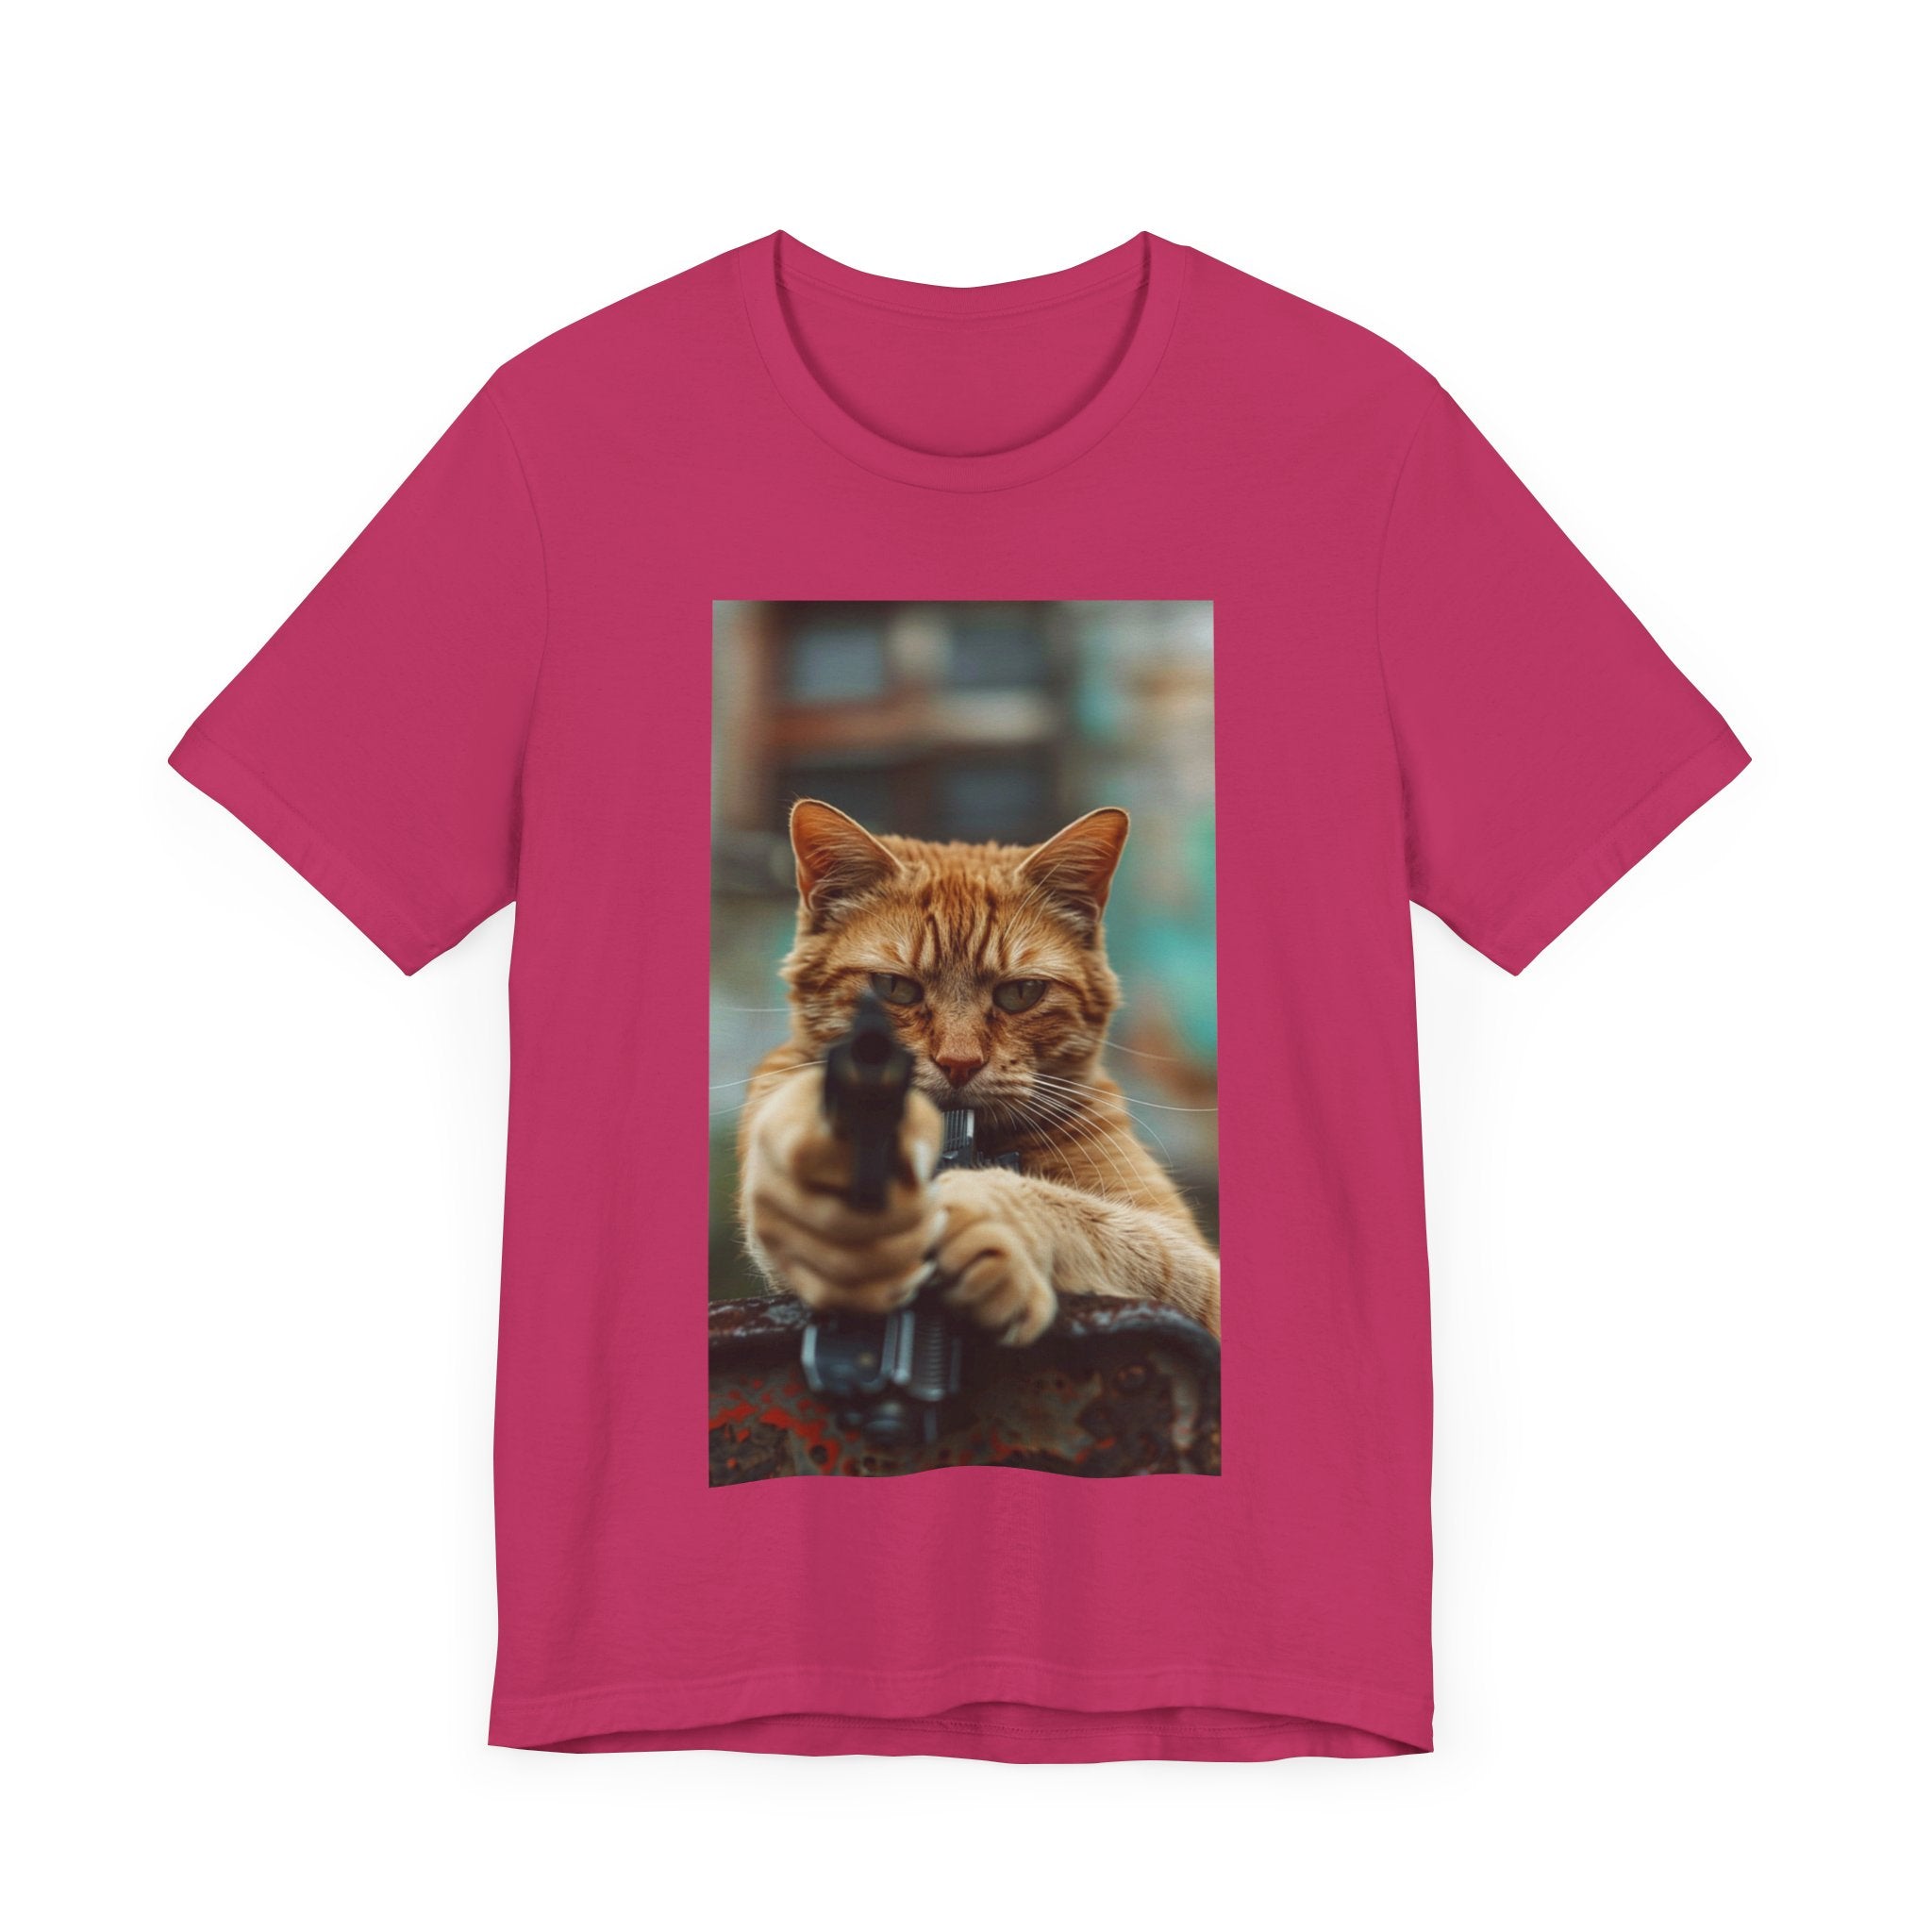 Stealth Paws: Feline Hitman Women's Jersey Short Sleeve Tee - Quirky Cat-Themed Apparel for Fashion-Forward Cat Lovers